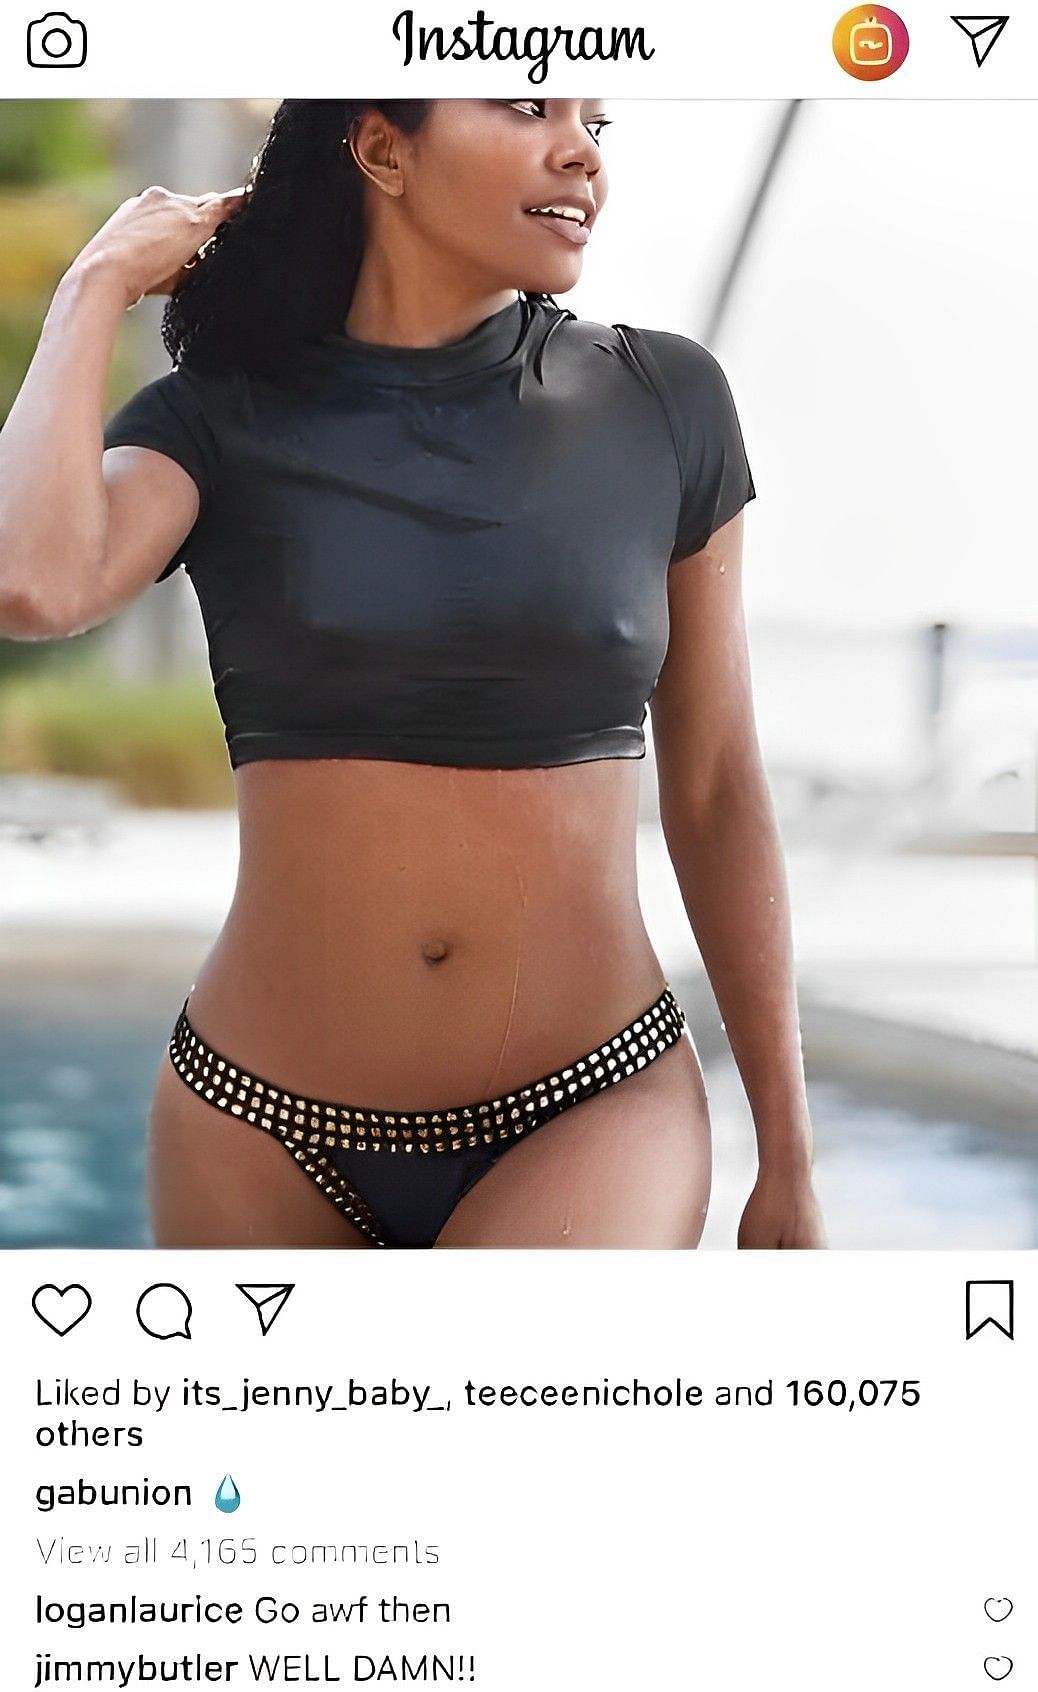 Jimmy Butler&#039;s comment on Gabrielle Union&#039;s IG post